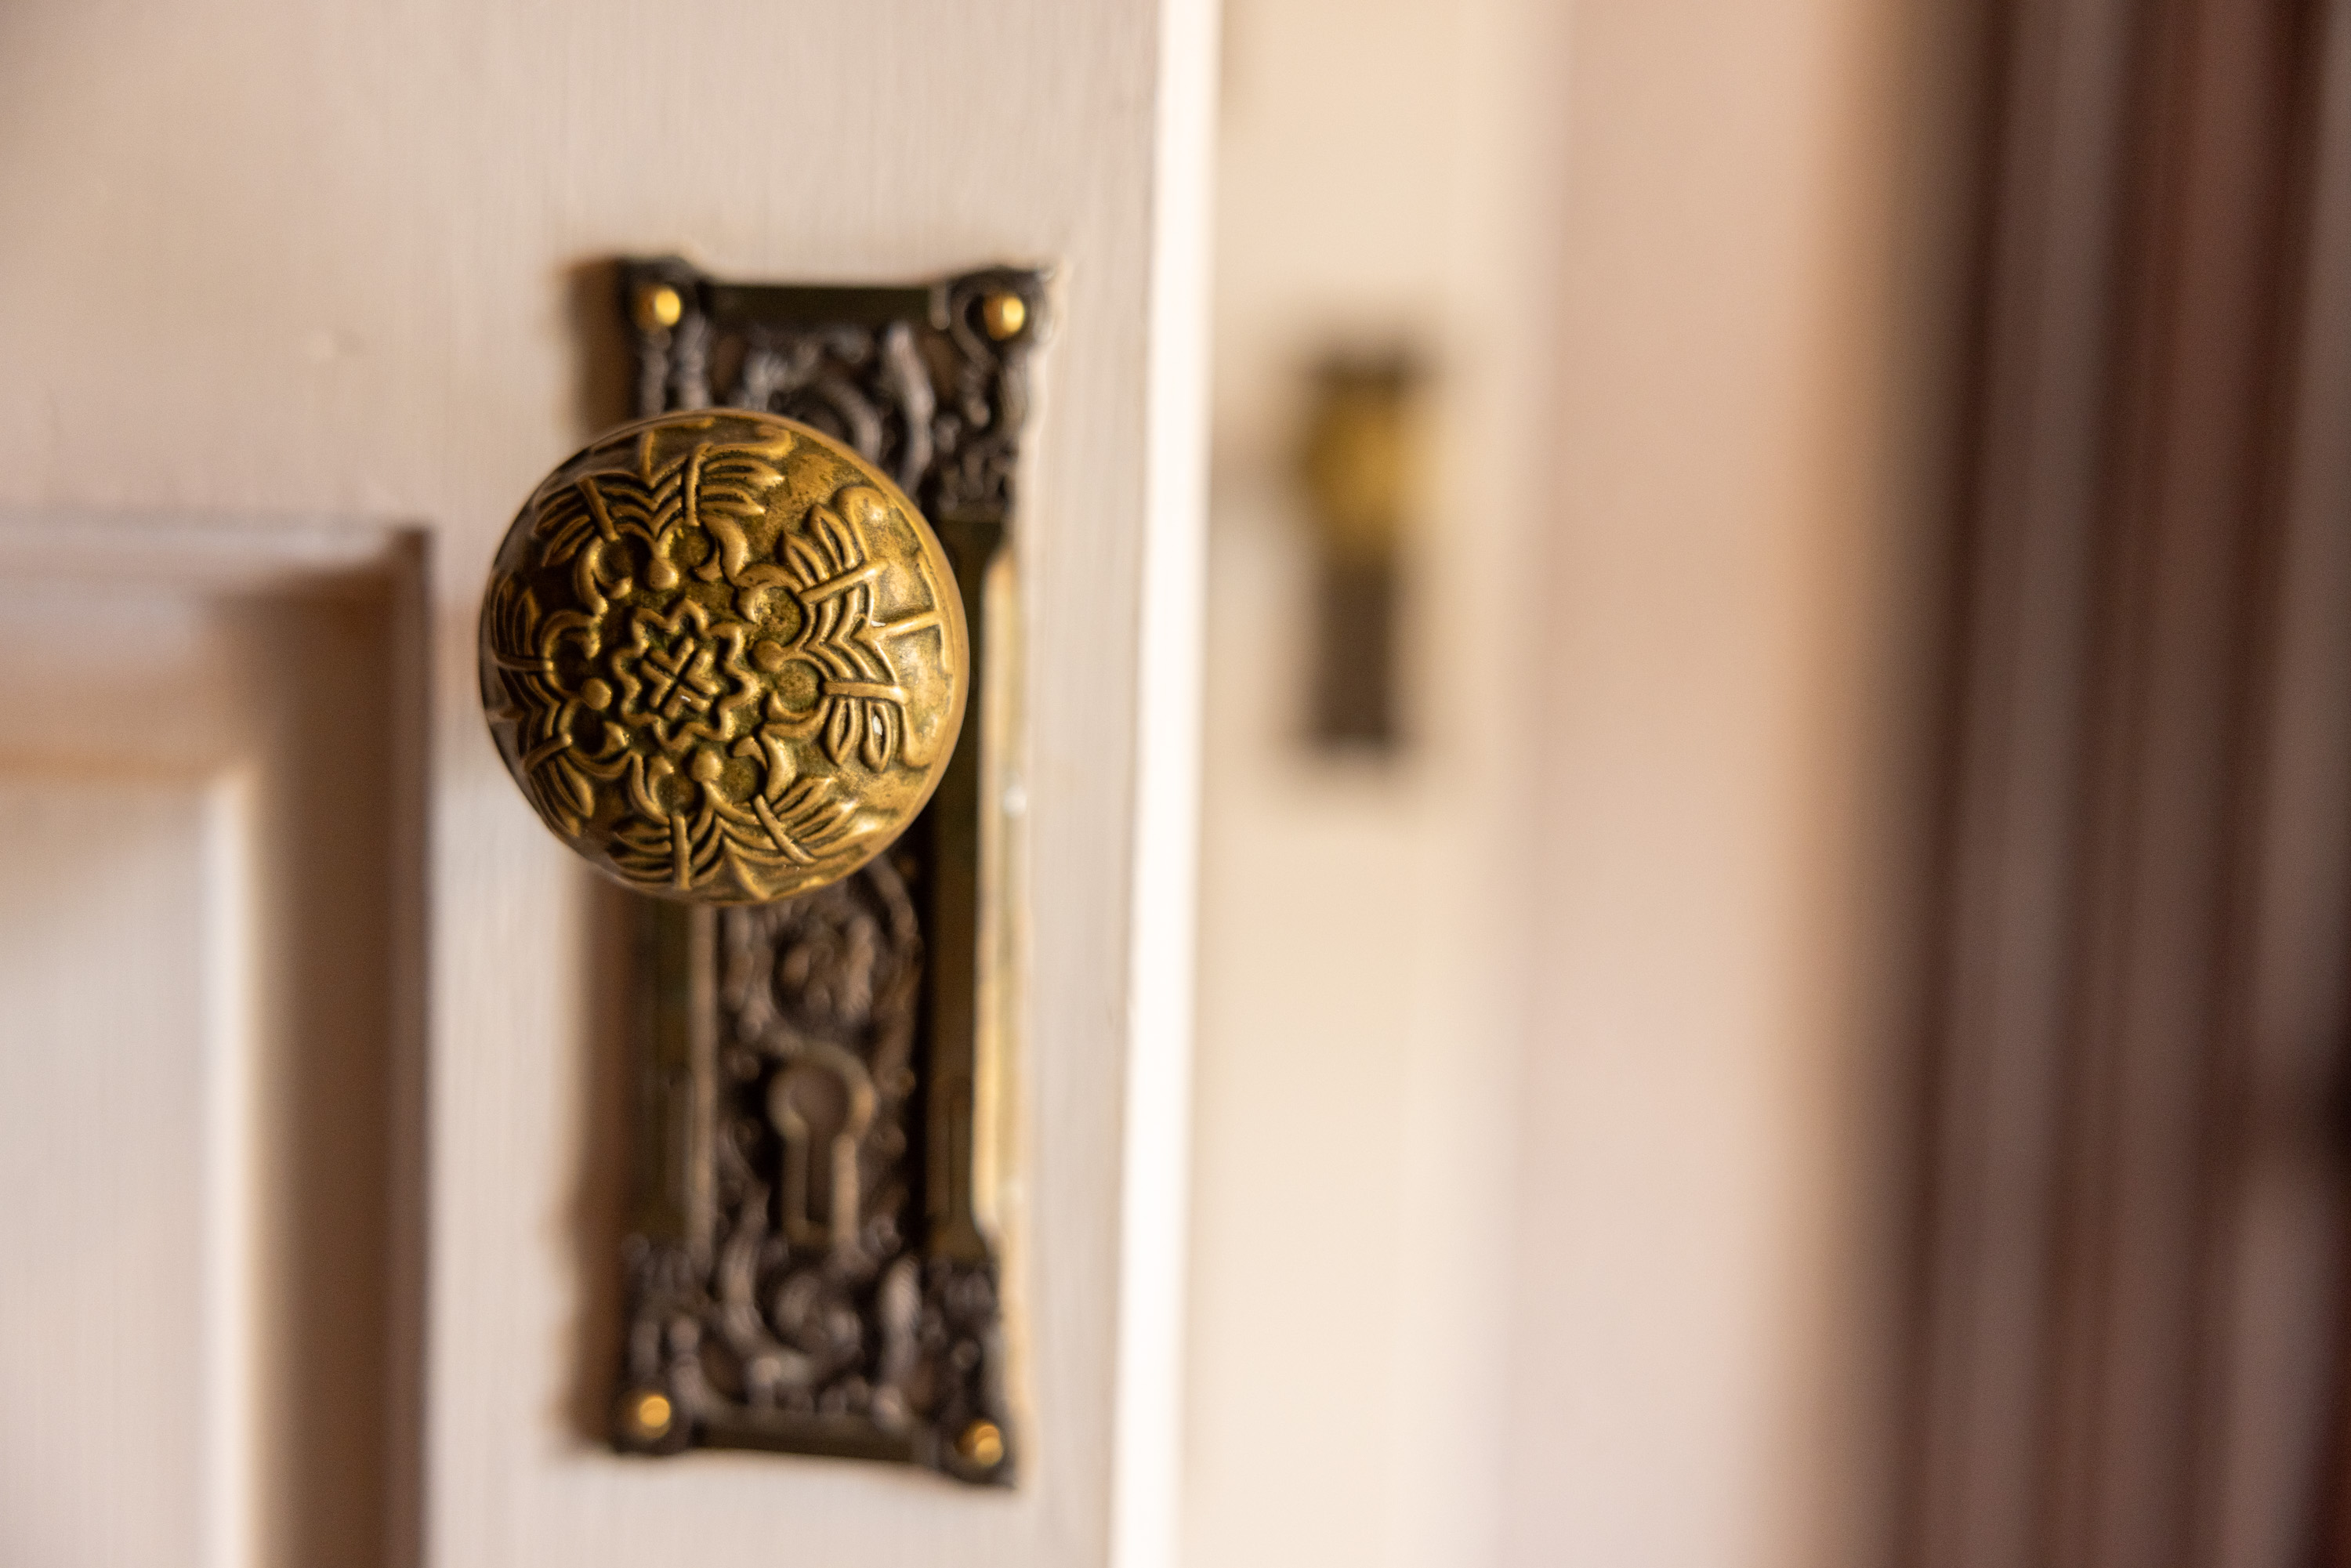 The image shows a close-up of an ornate brass doorknob with intricate floral designs, attached to a detailed brass plate on a white wooden door.